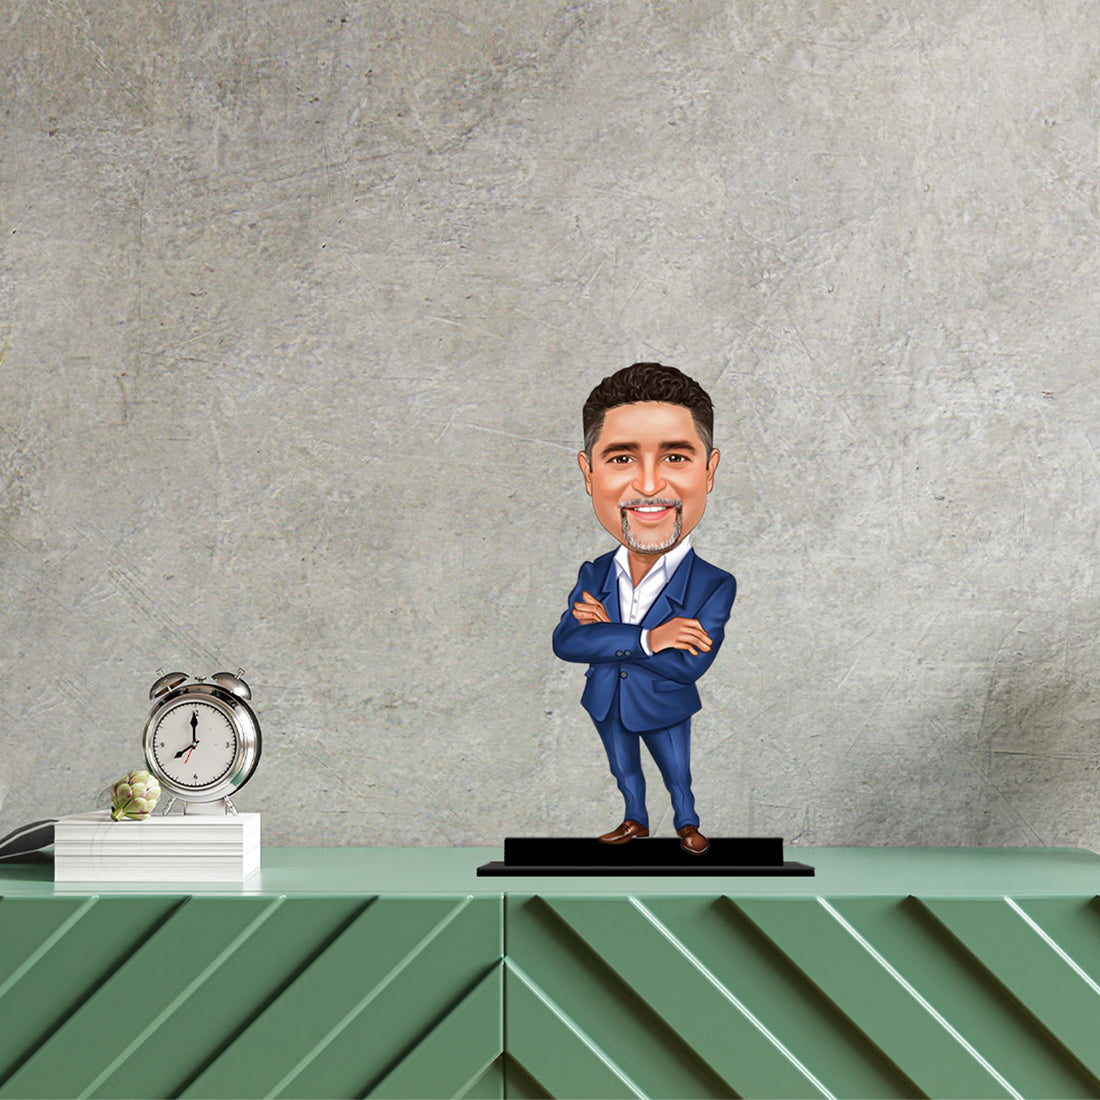 Gift for corporate employee/boss – Personalized Caricature